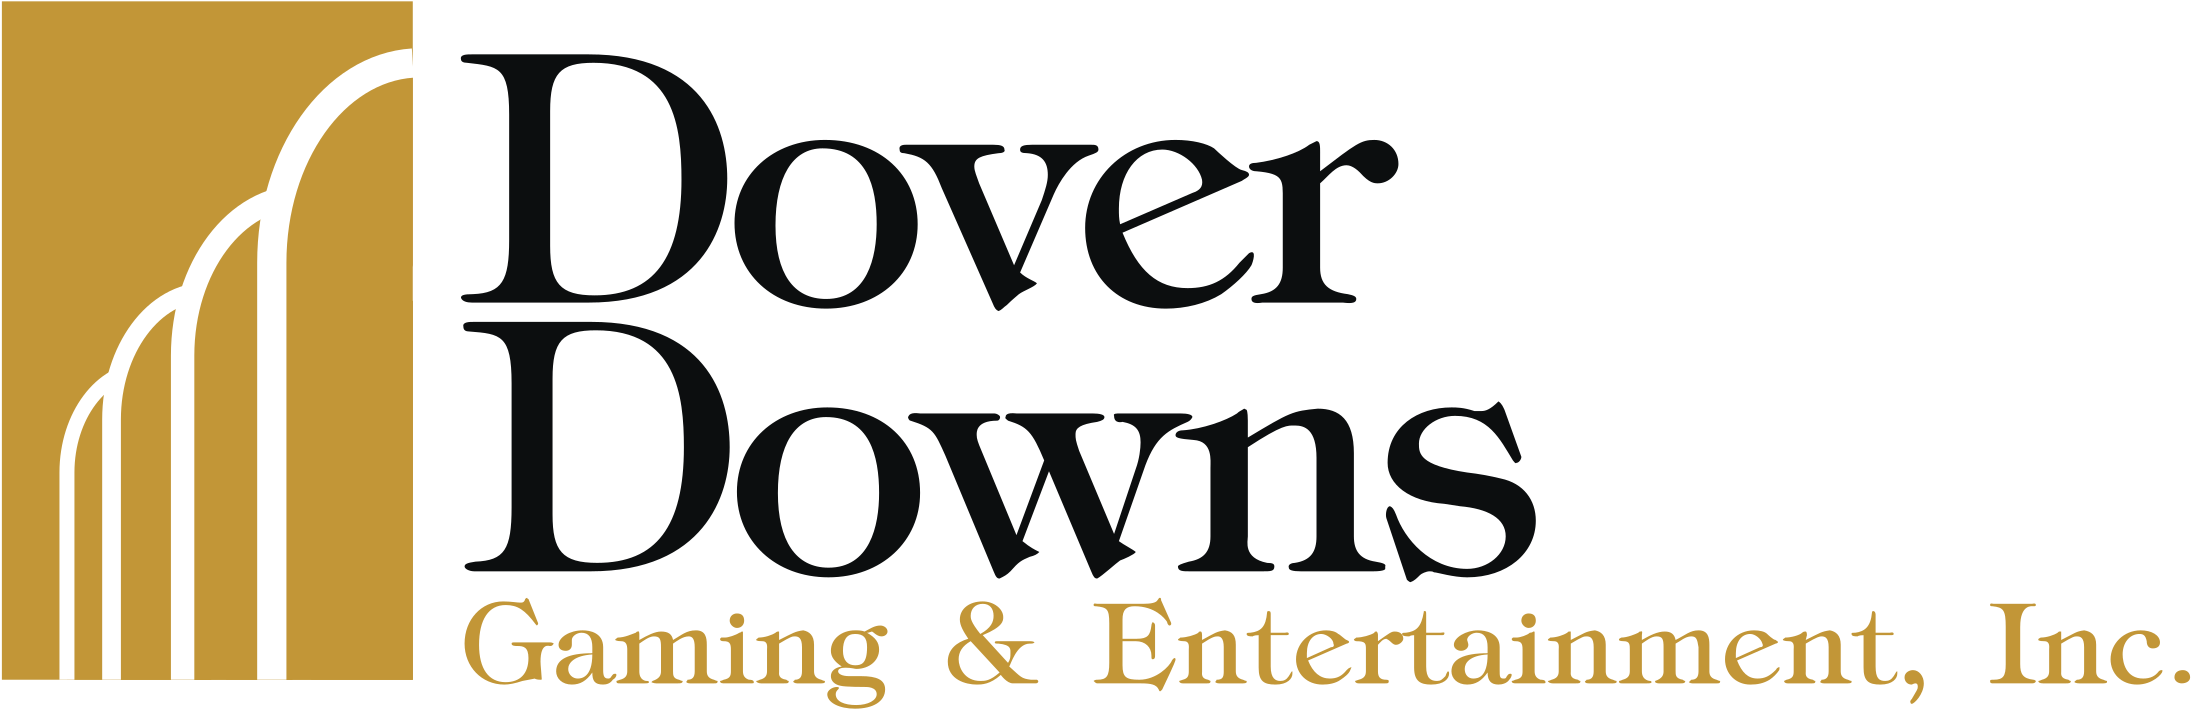 Dover Downs Gaming & Entertainment